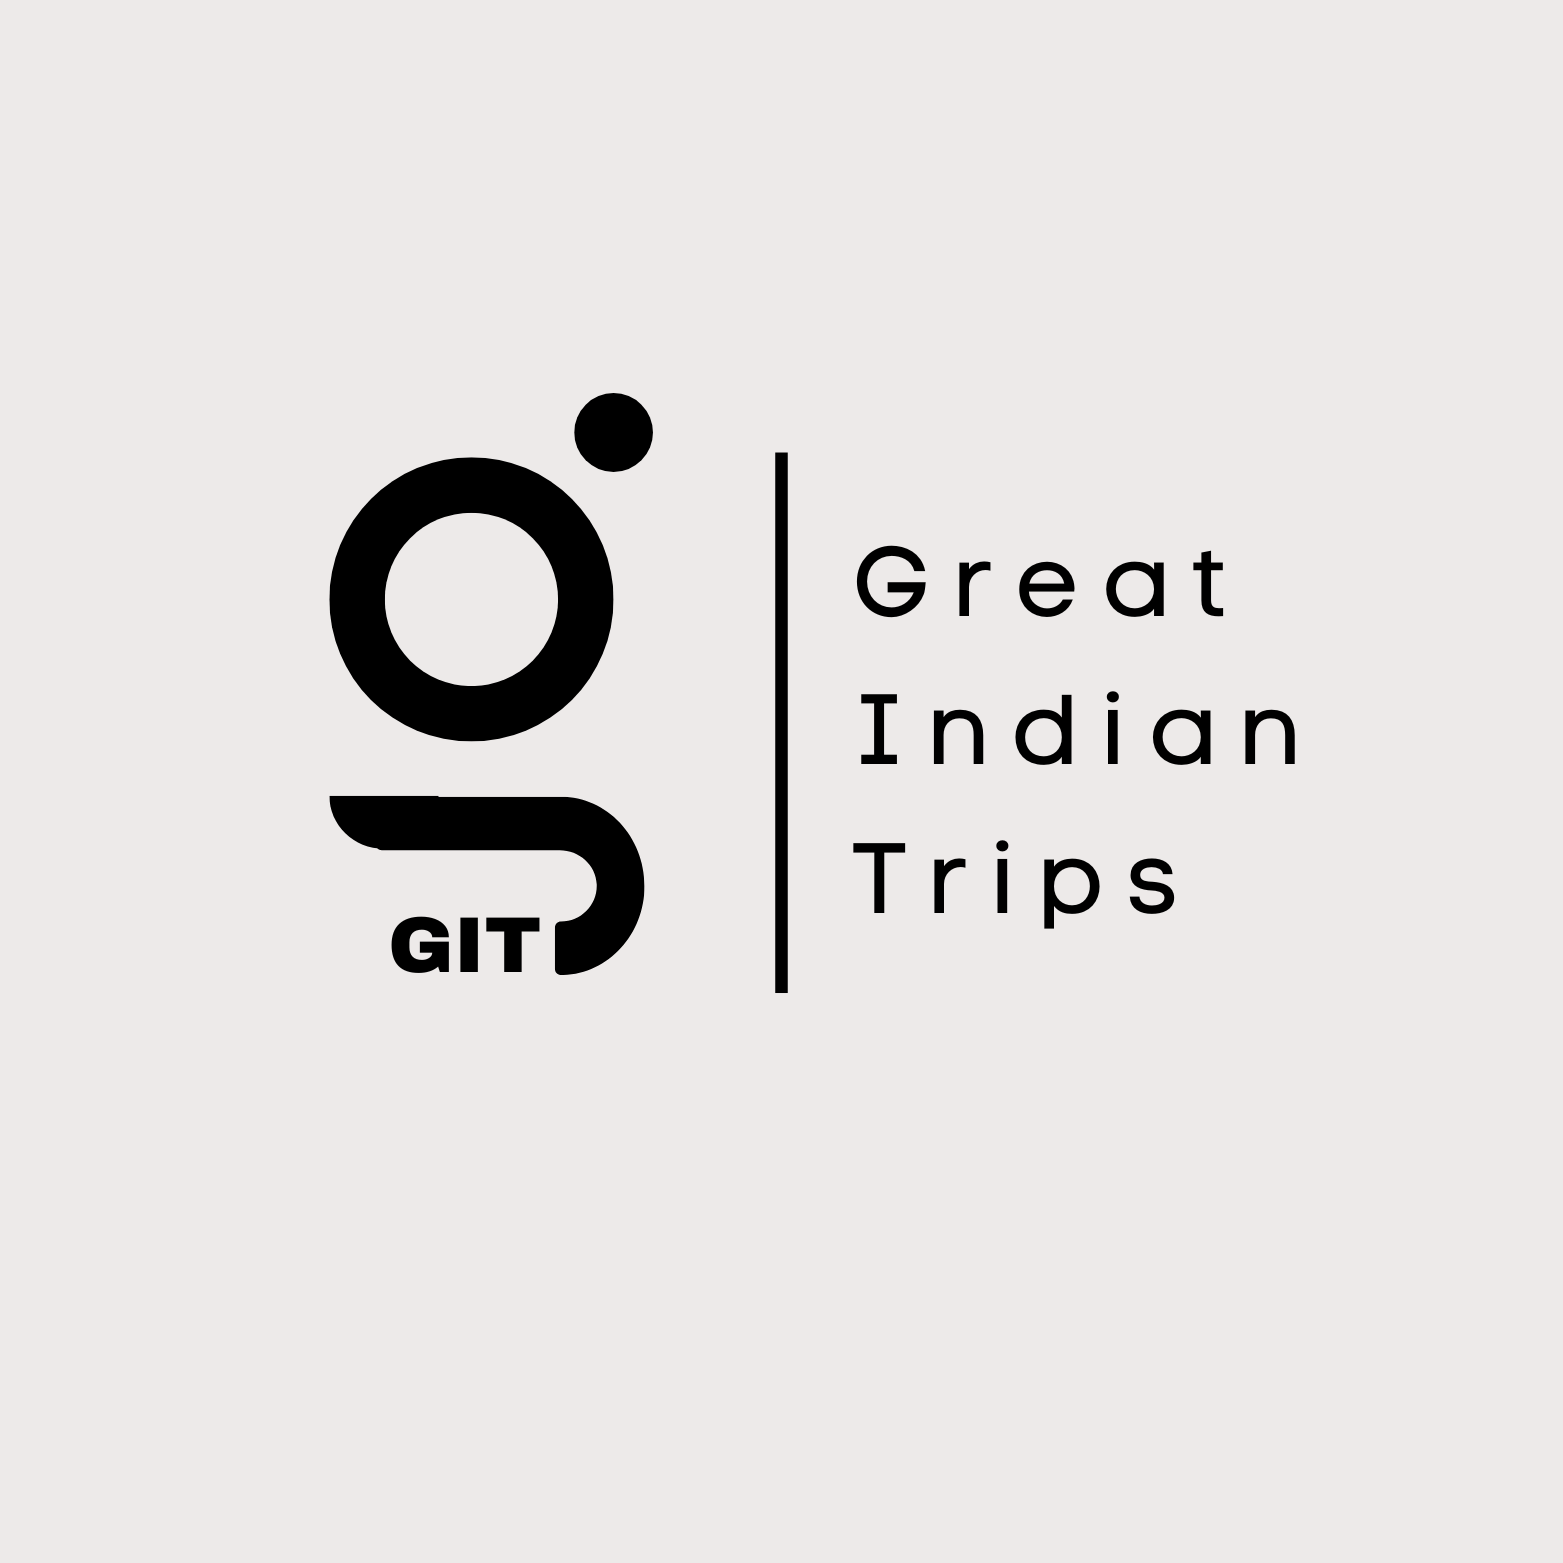 Great Indian Trips